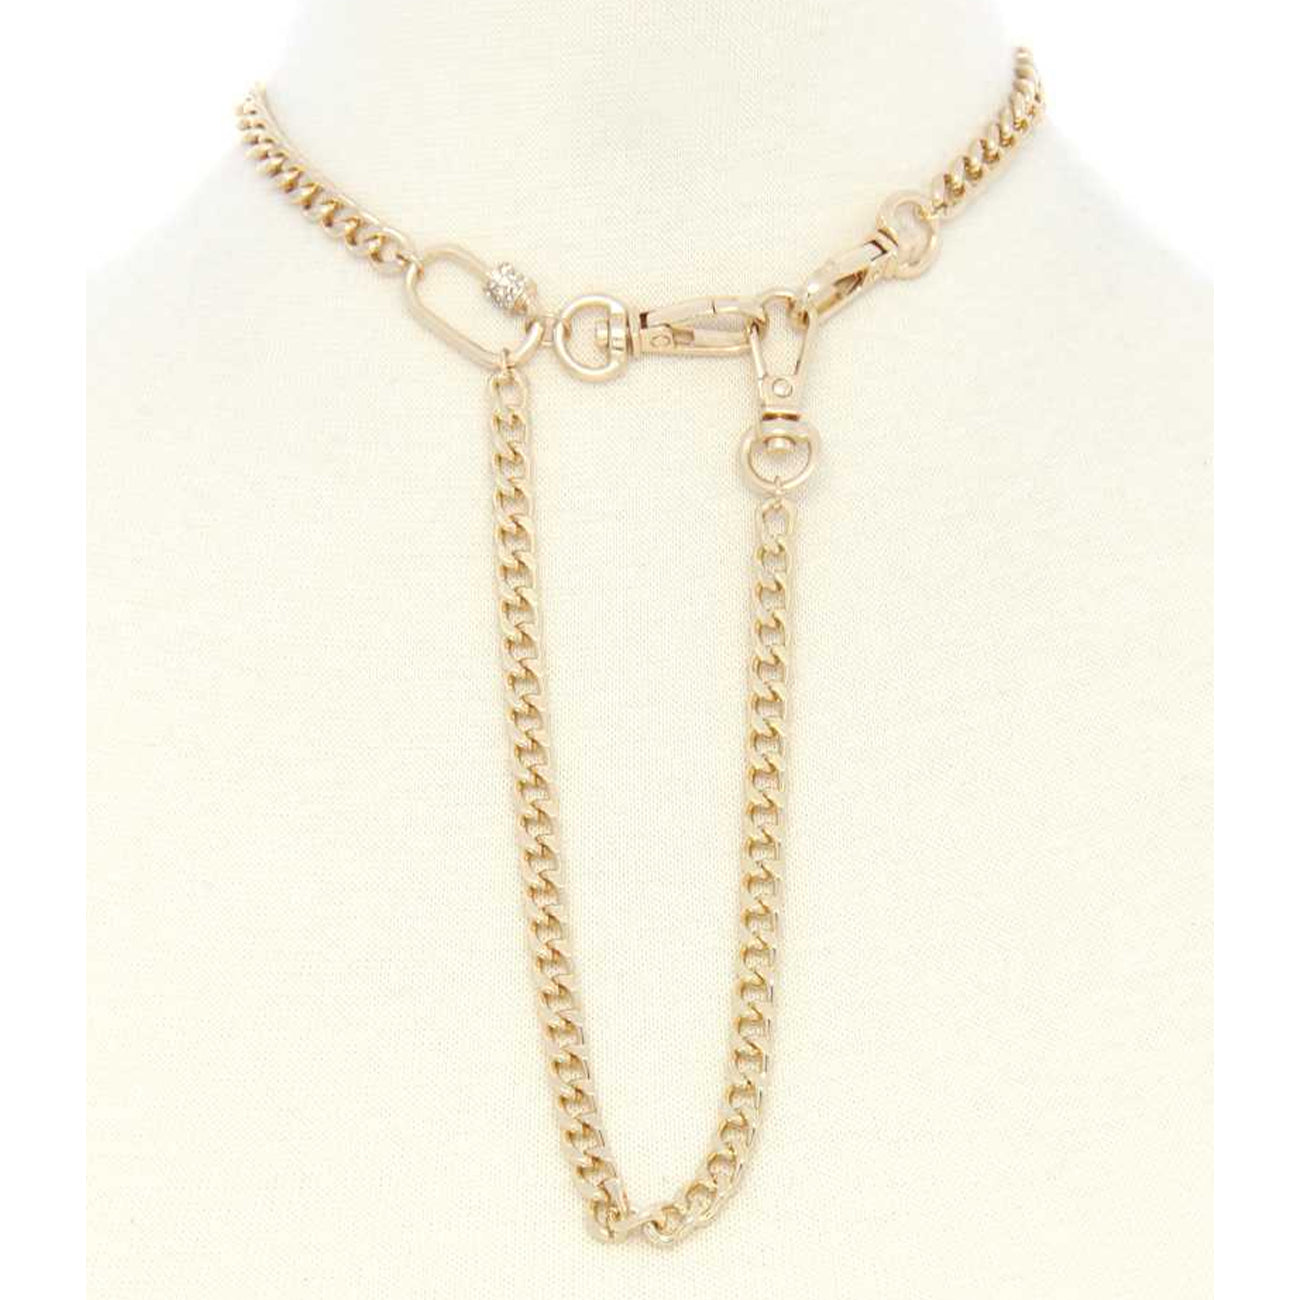 Gold Oval Charm Curb Link Metal Necklace